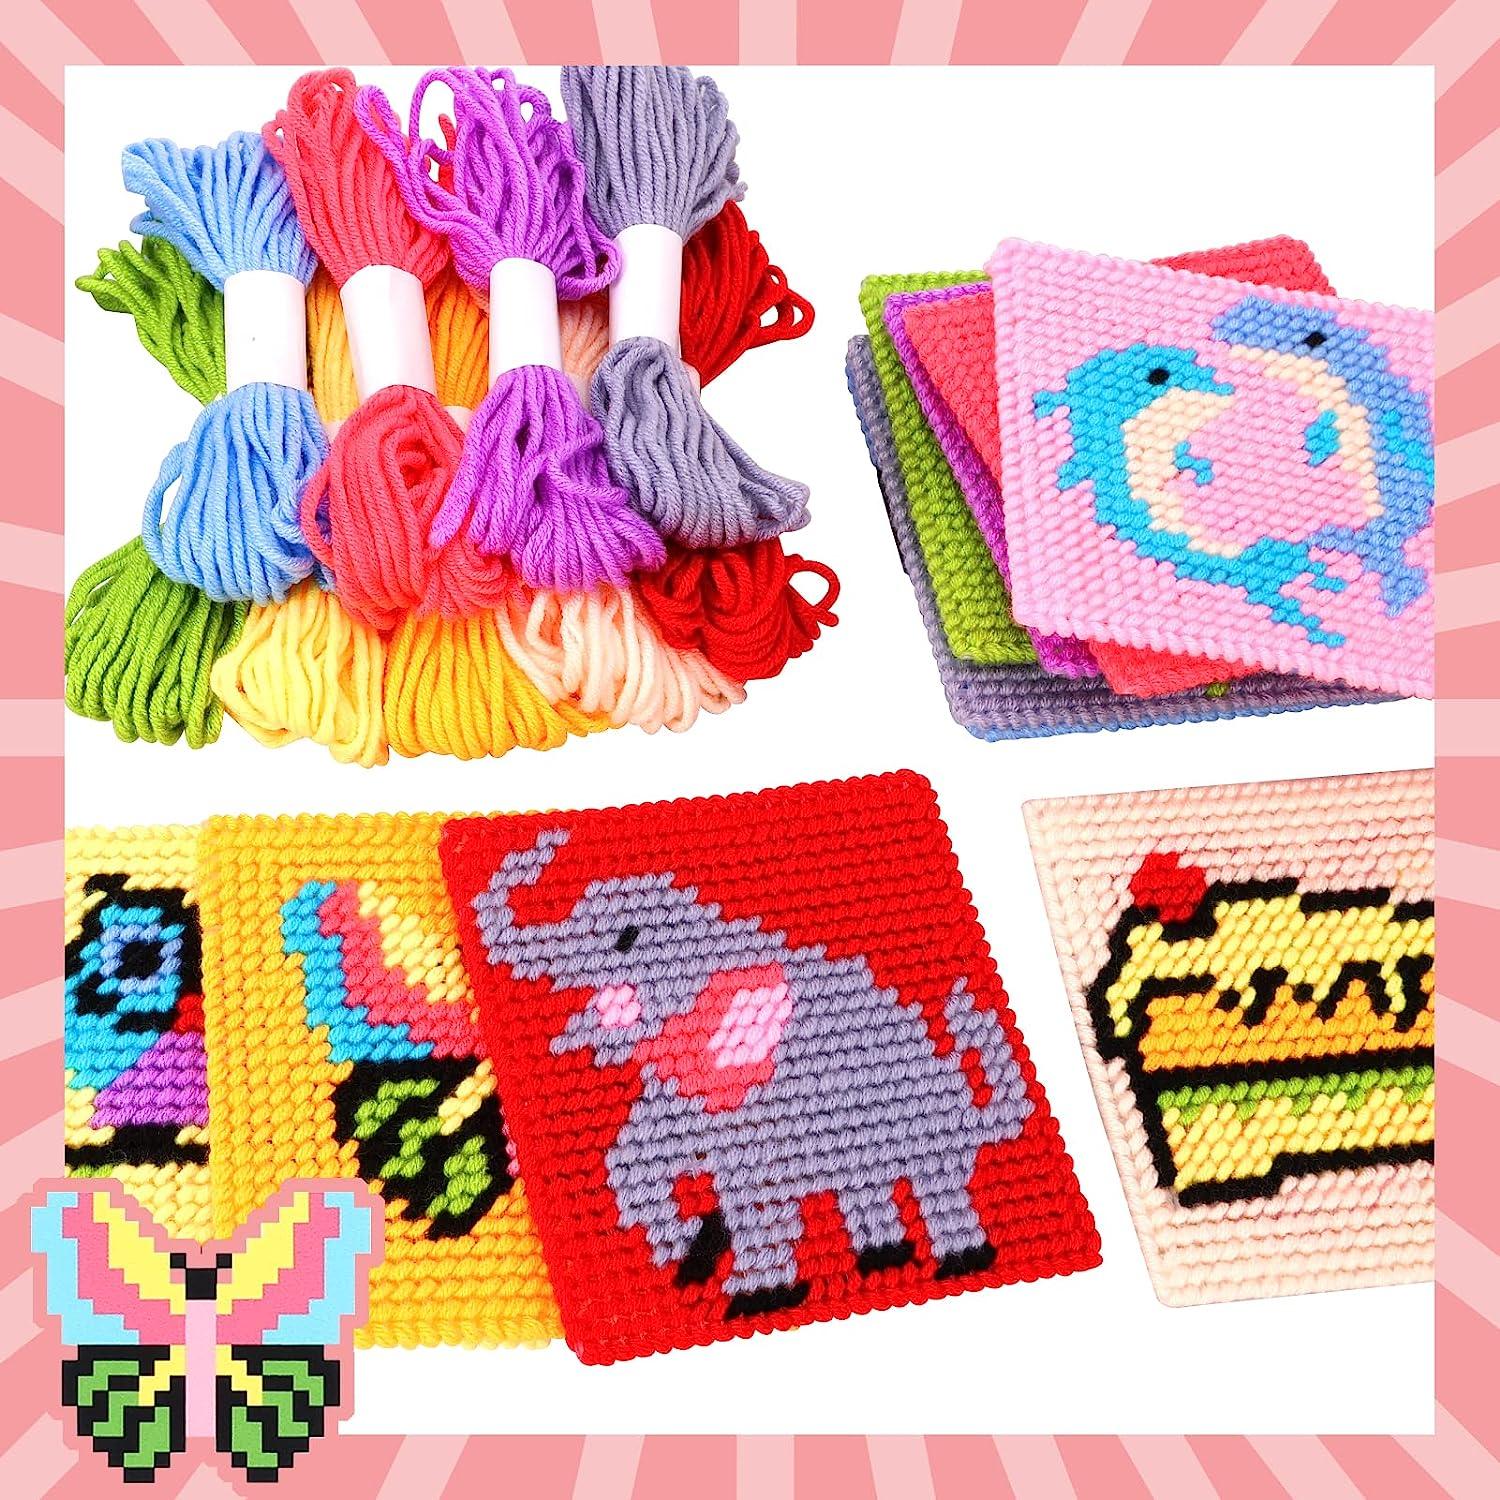  Pllieay 6 Pcs Cross Stitch Kits for Beginners for Kids 7-13,  Kids Embroidery Kit Needlepoint Kit Arts and Crafts Kit with Instructions  for Backpack Charms, Ornaments and Needle Craft : Arts